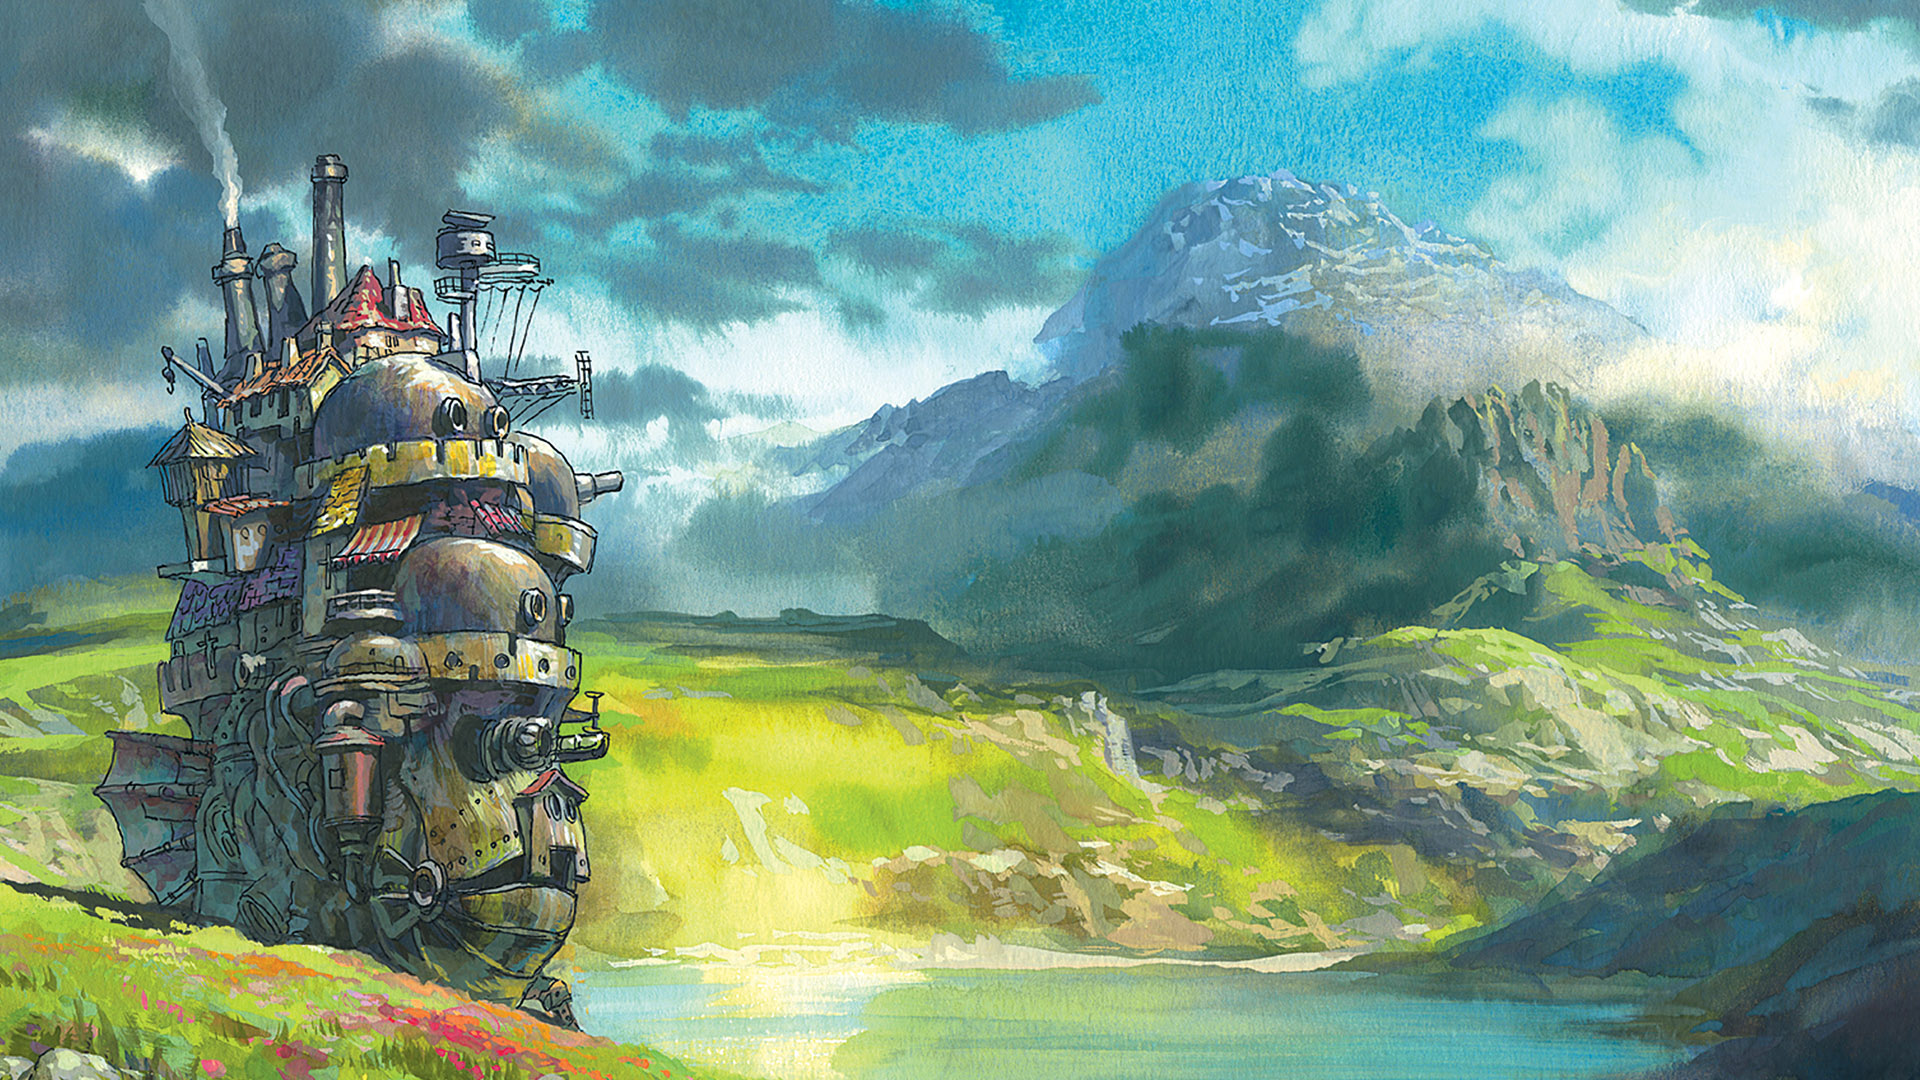 howls moving castle book